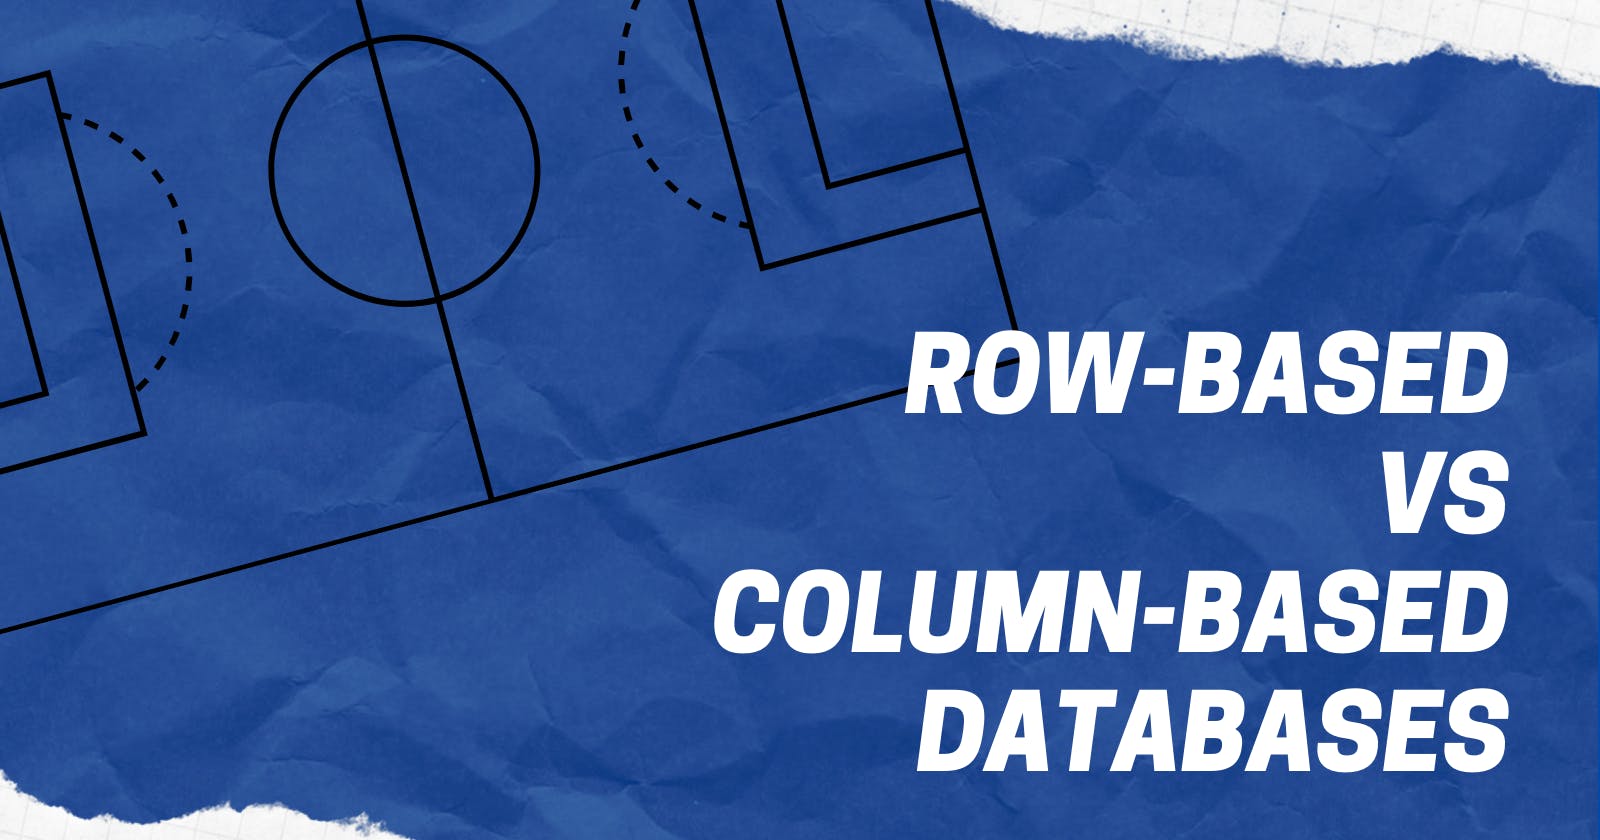 What are row/column-based databases?